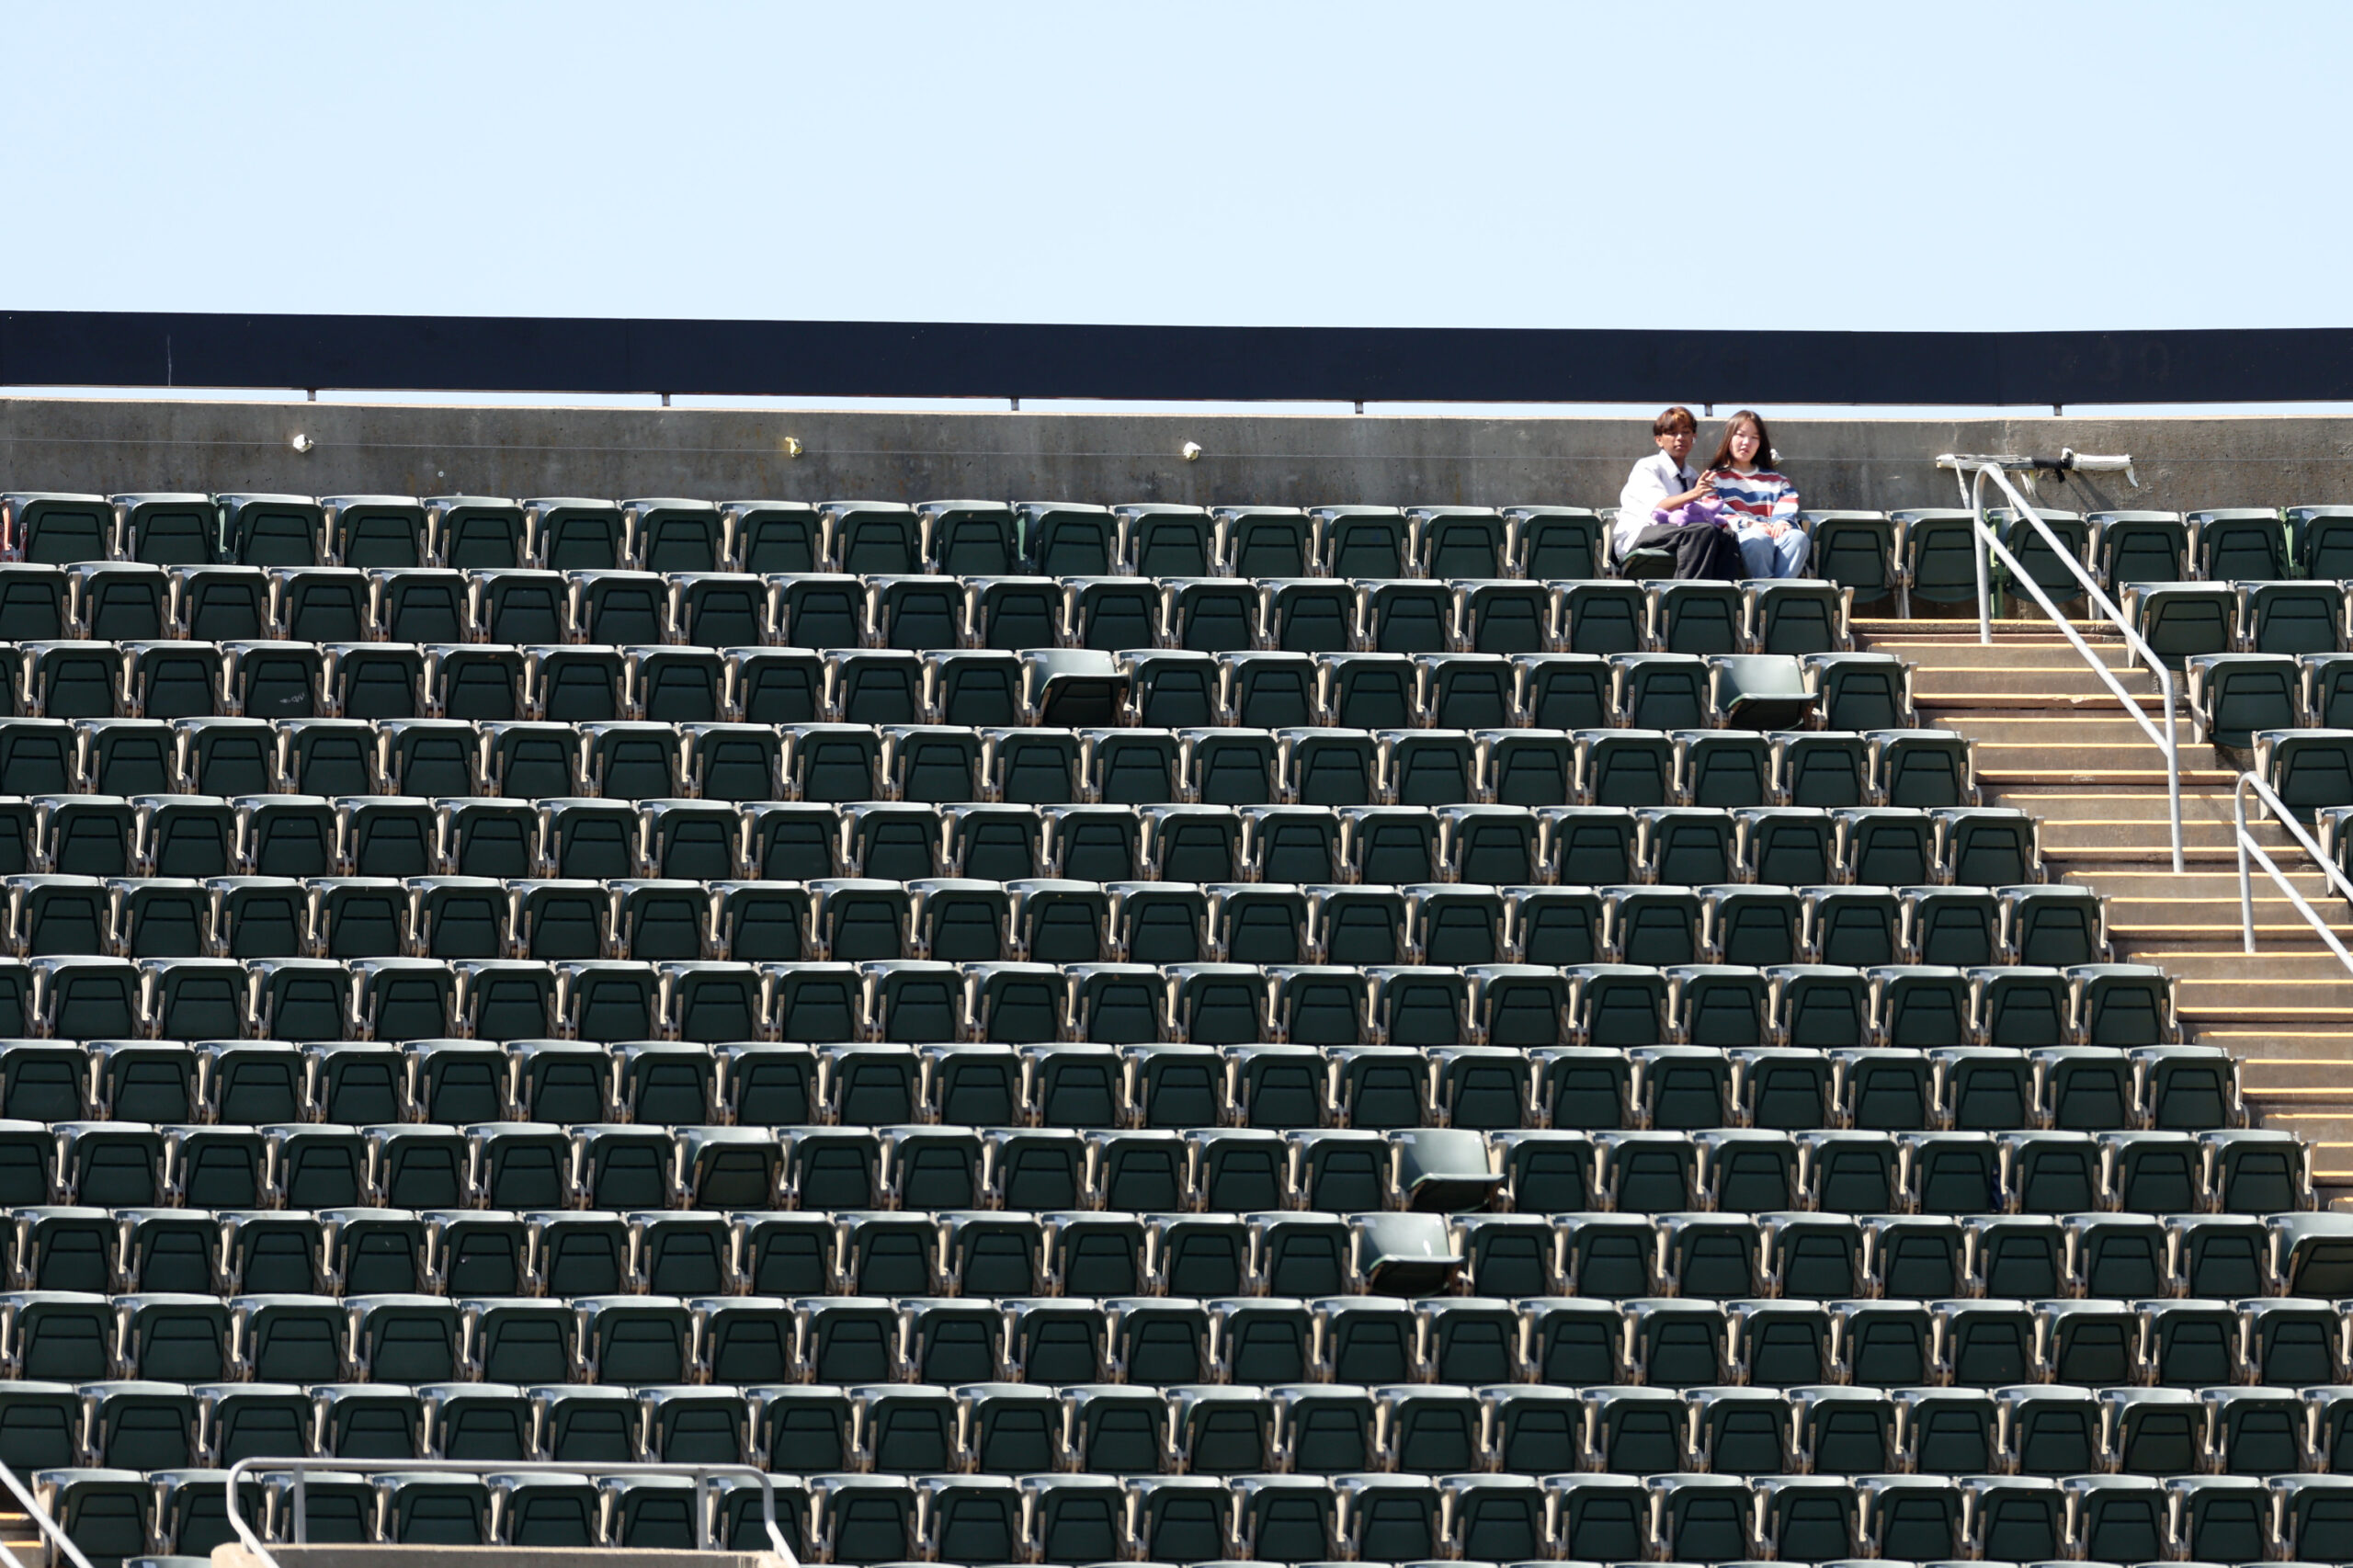 OAKLAND, CALIFORNIA - APRIL 19: Fans sit in the top row of the stadium by themselves to watch the Oakland Athletics play the Chicago Cubs at RingCentral Coliseum on April 19, 2023 in Oakland, California. (Photo by Ezra Shaw/Getty Images)